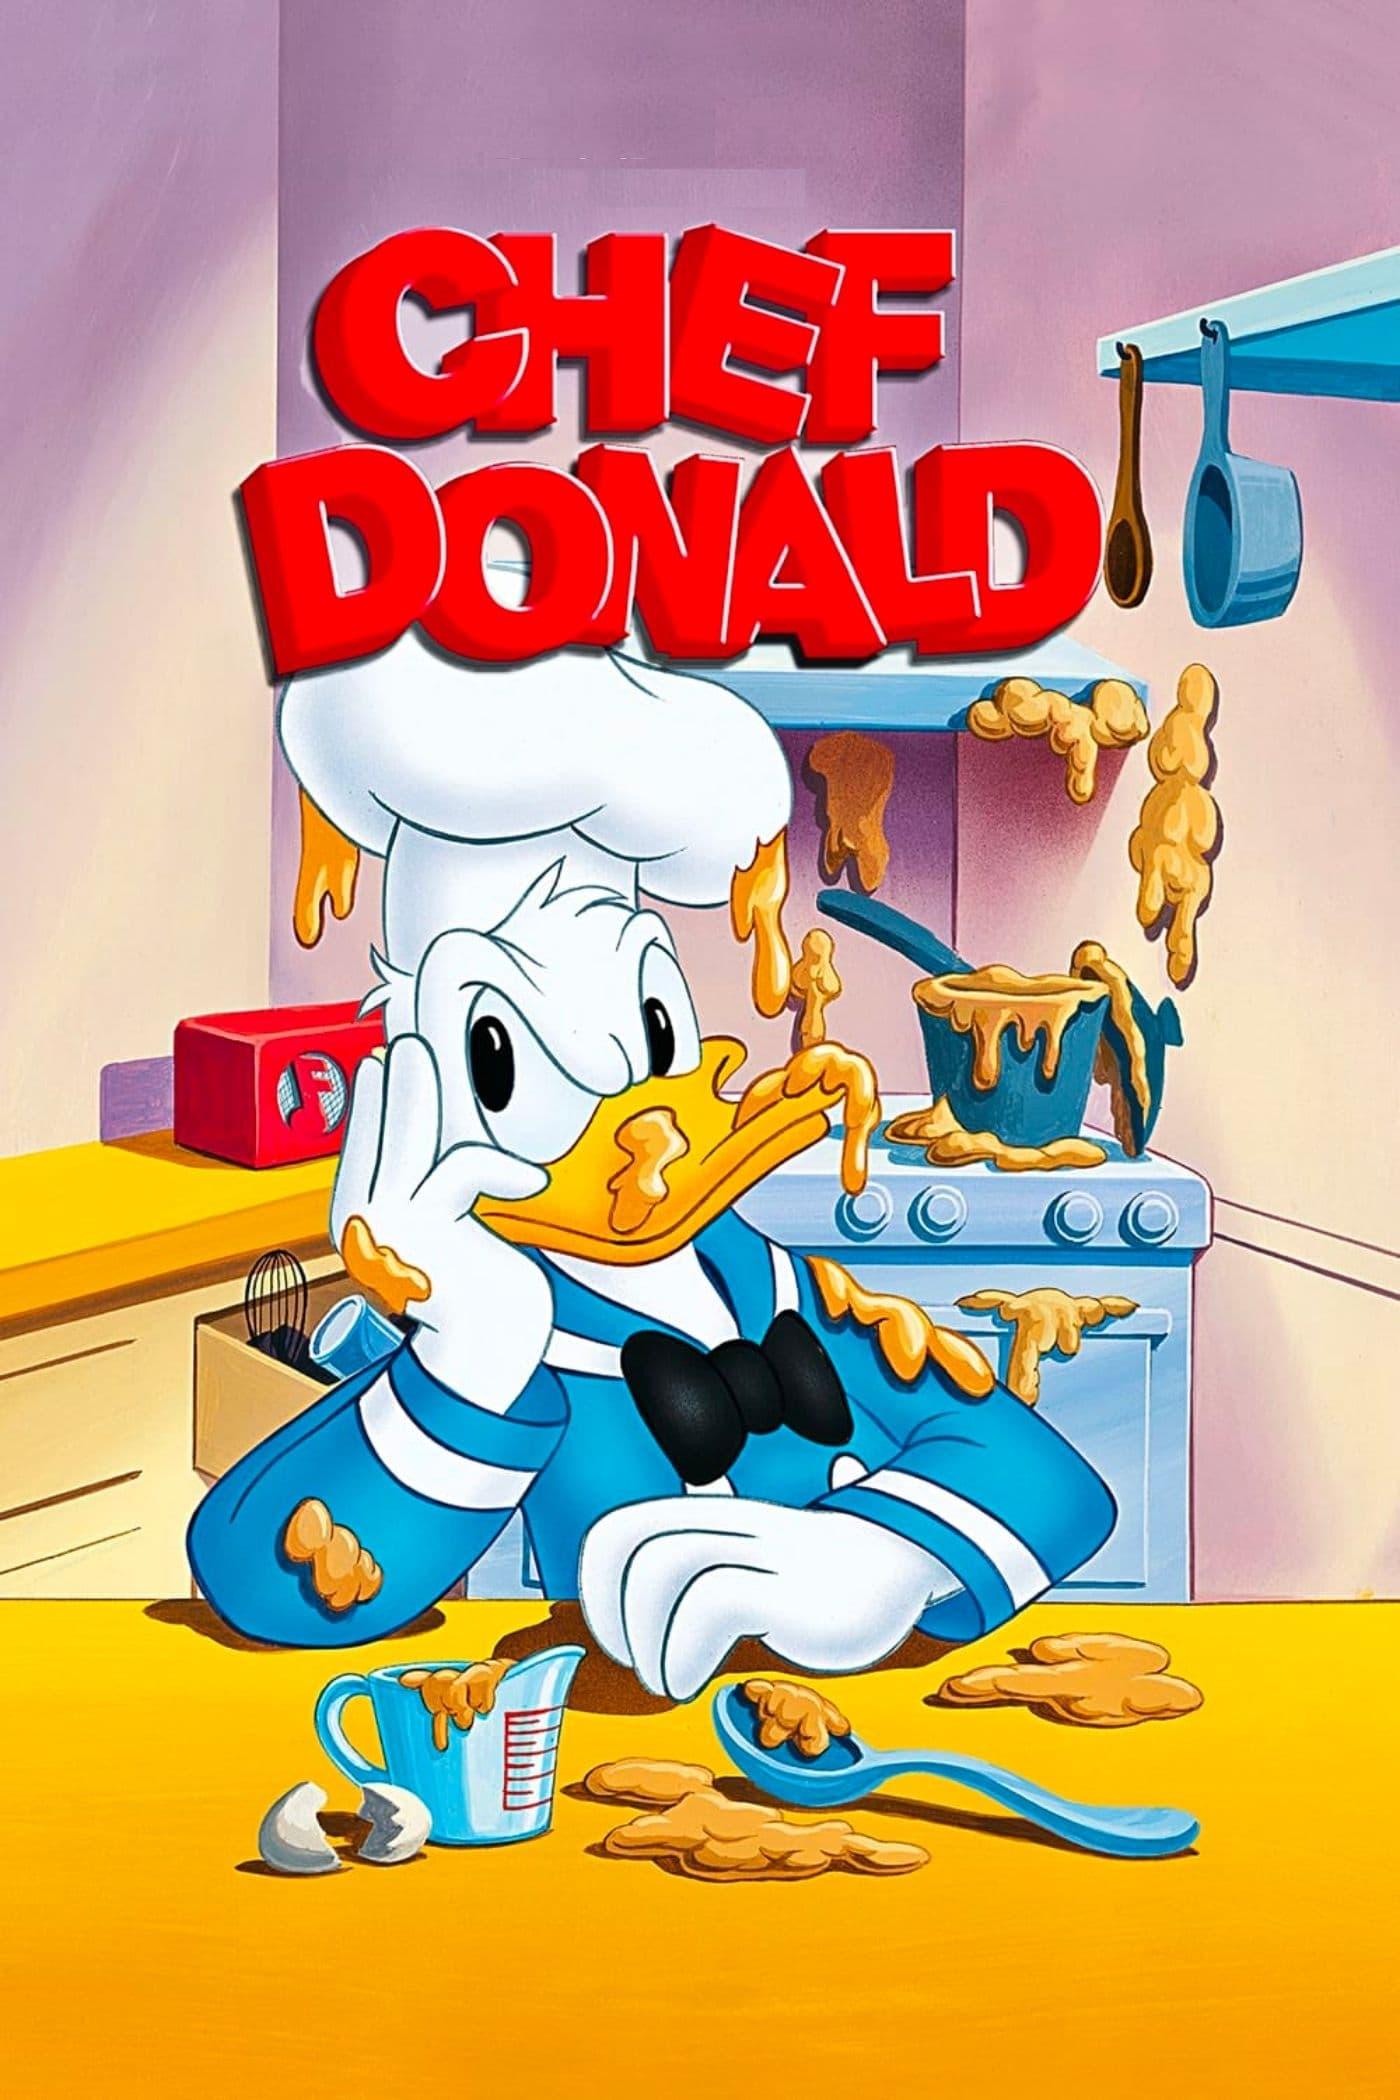 Chef Donald poster